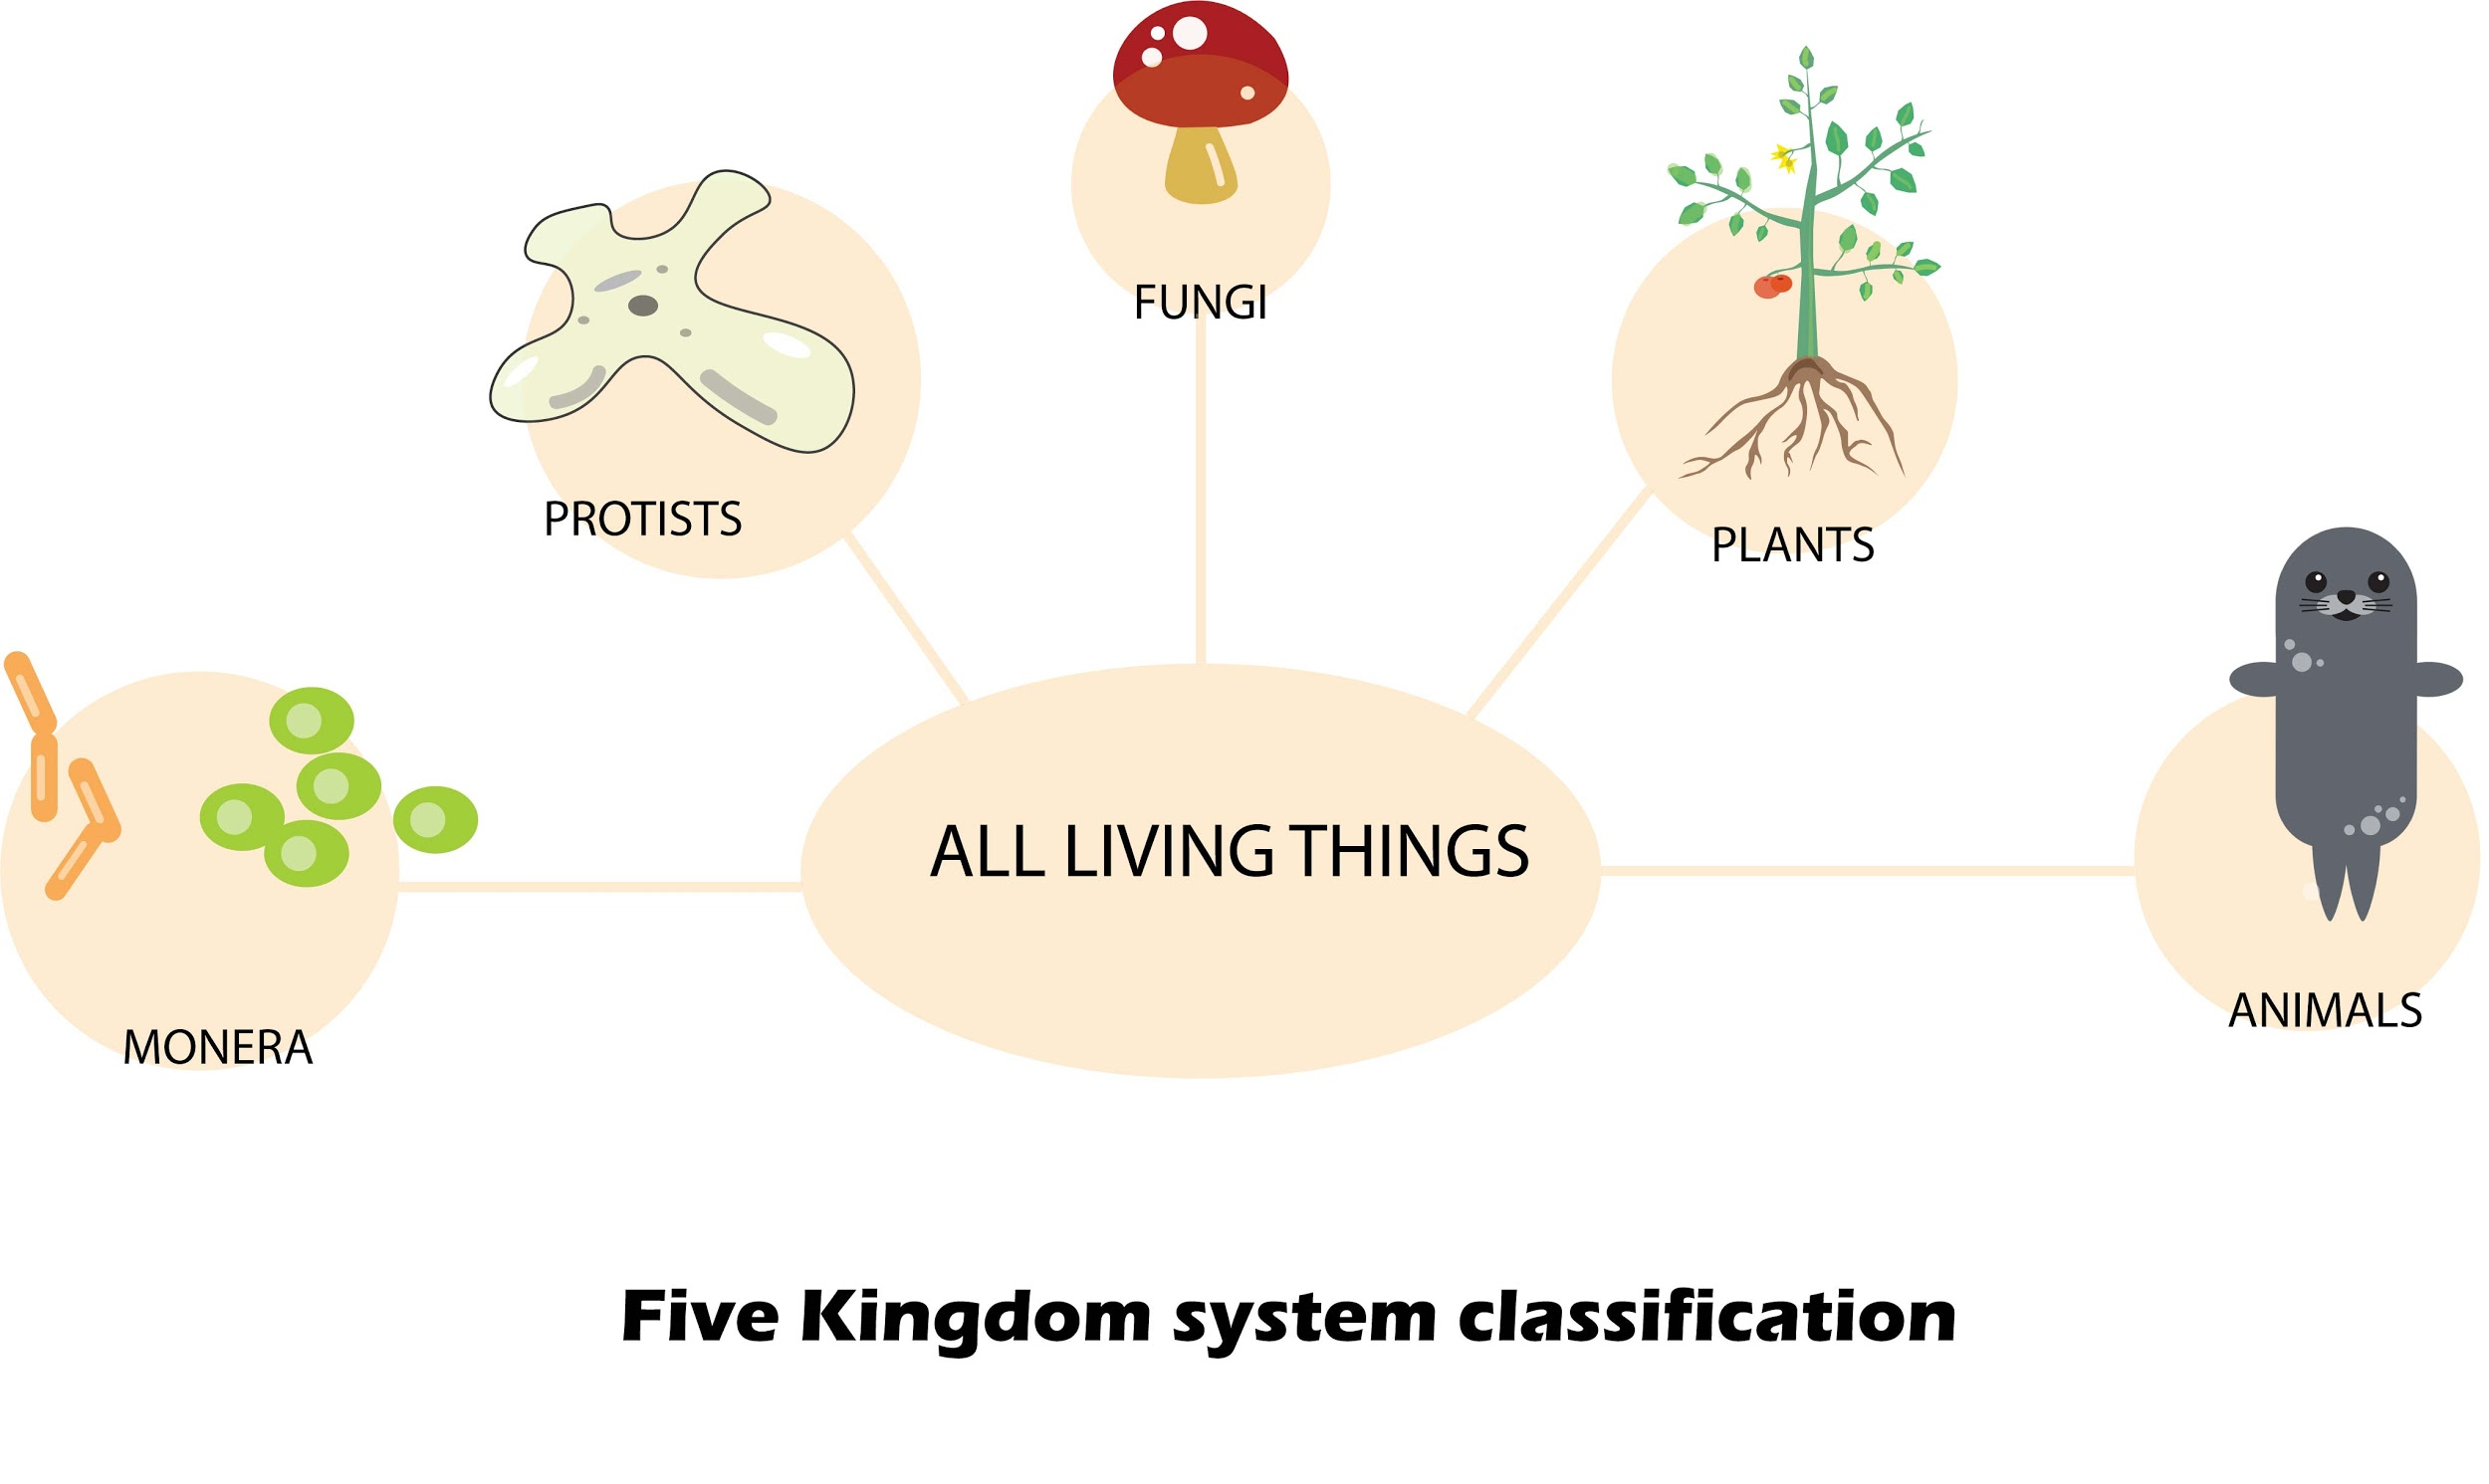 The number of criteria used as classifying organisms in five-kingdom  classification is A. 5B. 4C. 3D. 1